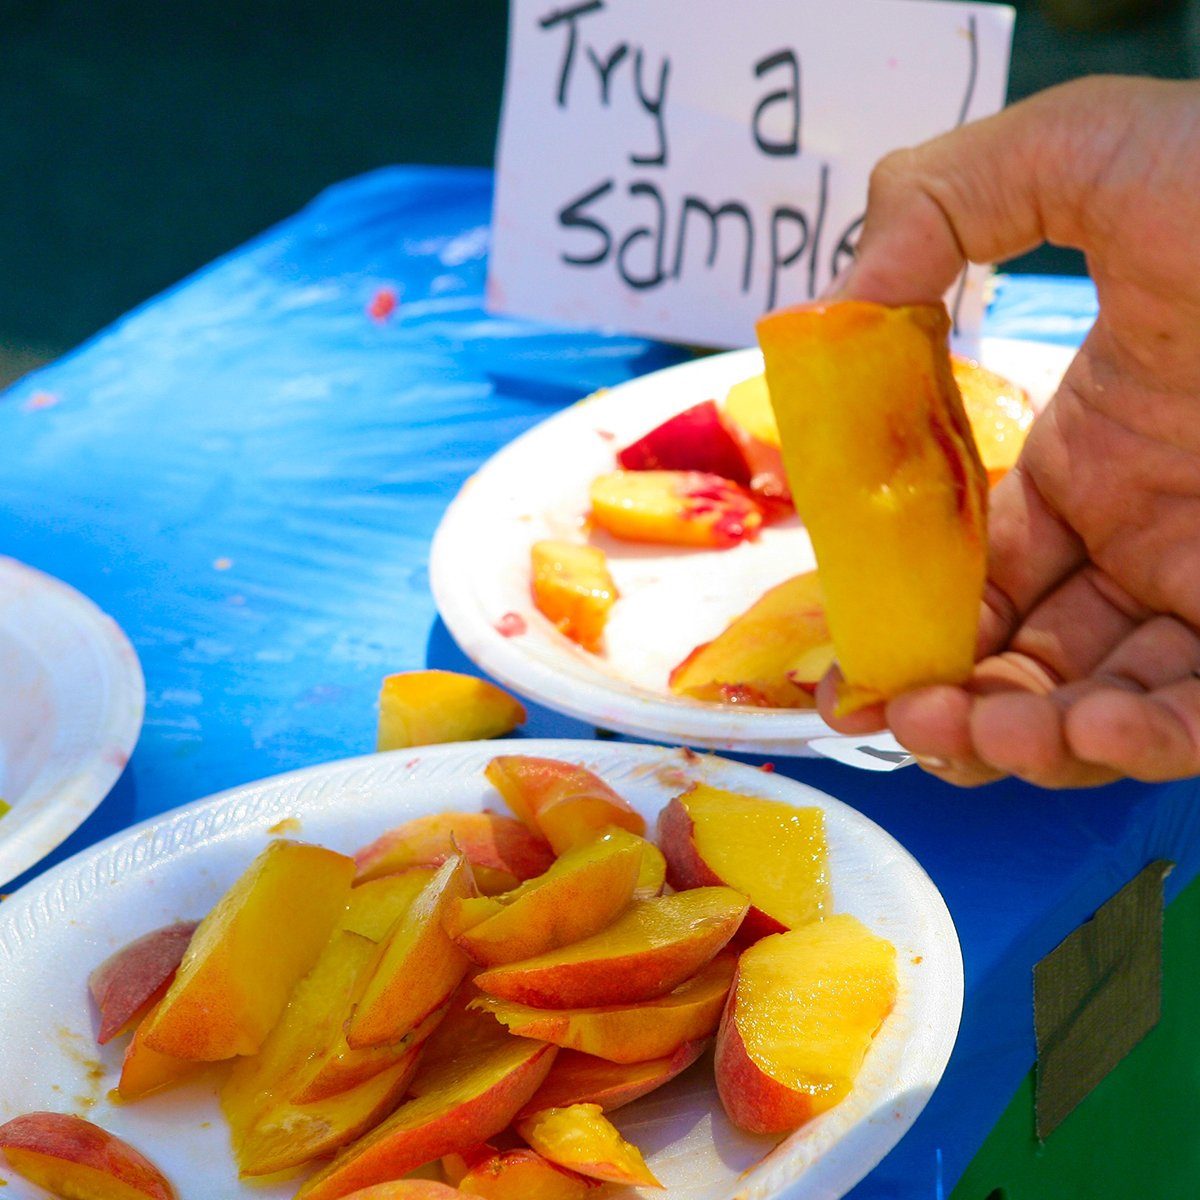 Farmer's market selling fresh, home-grown fruit, cutting samples for shoppers to try.